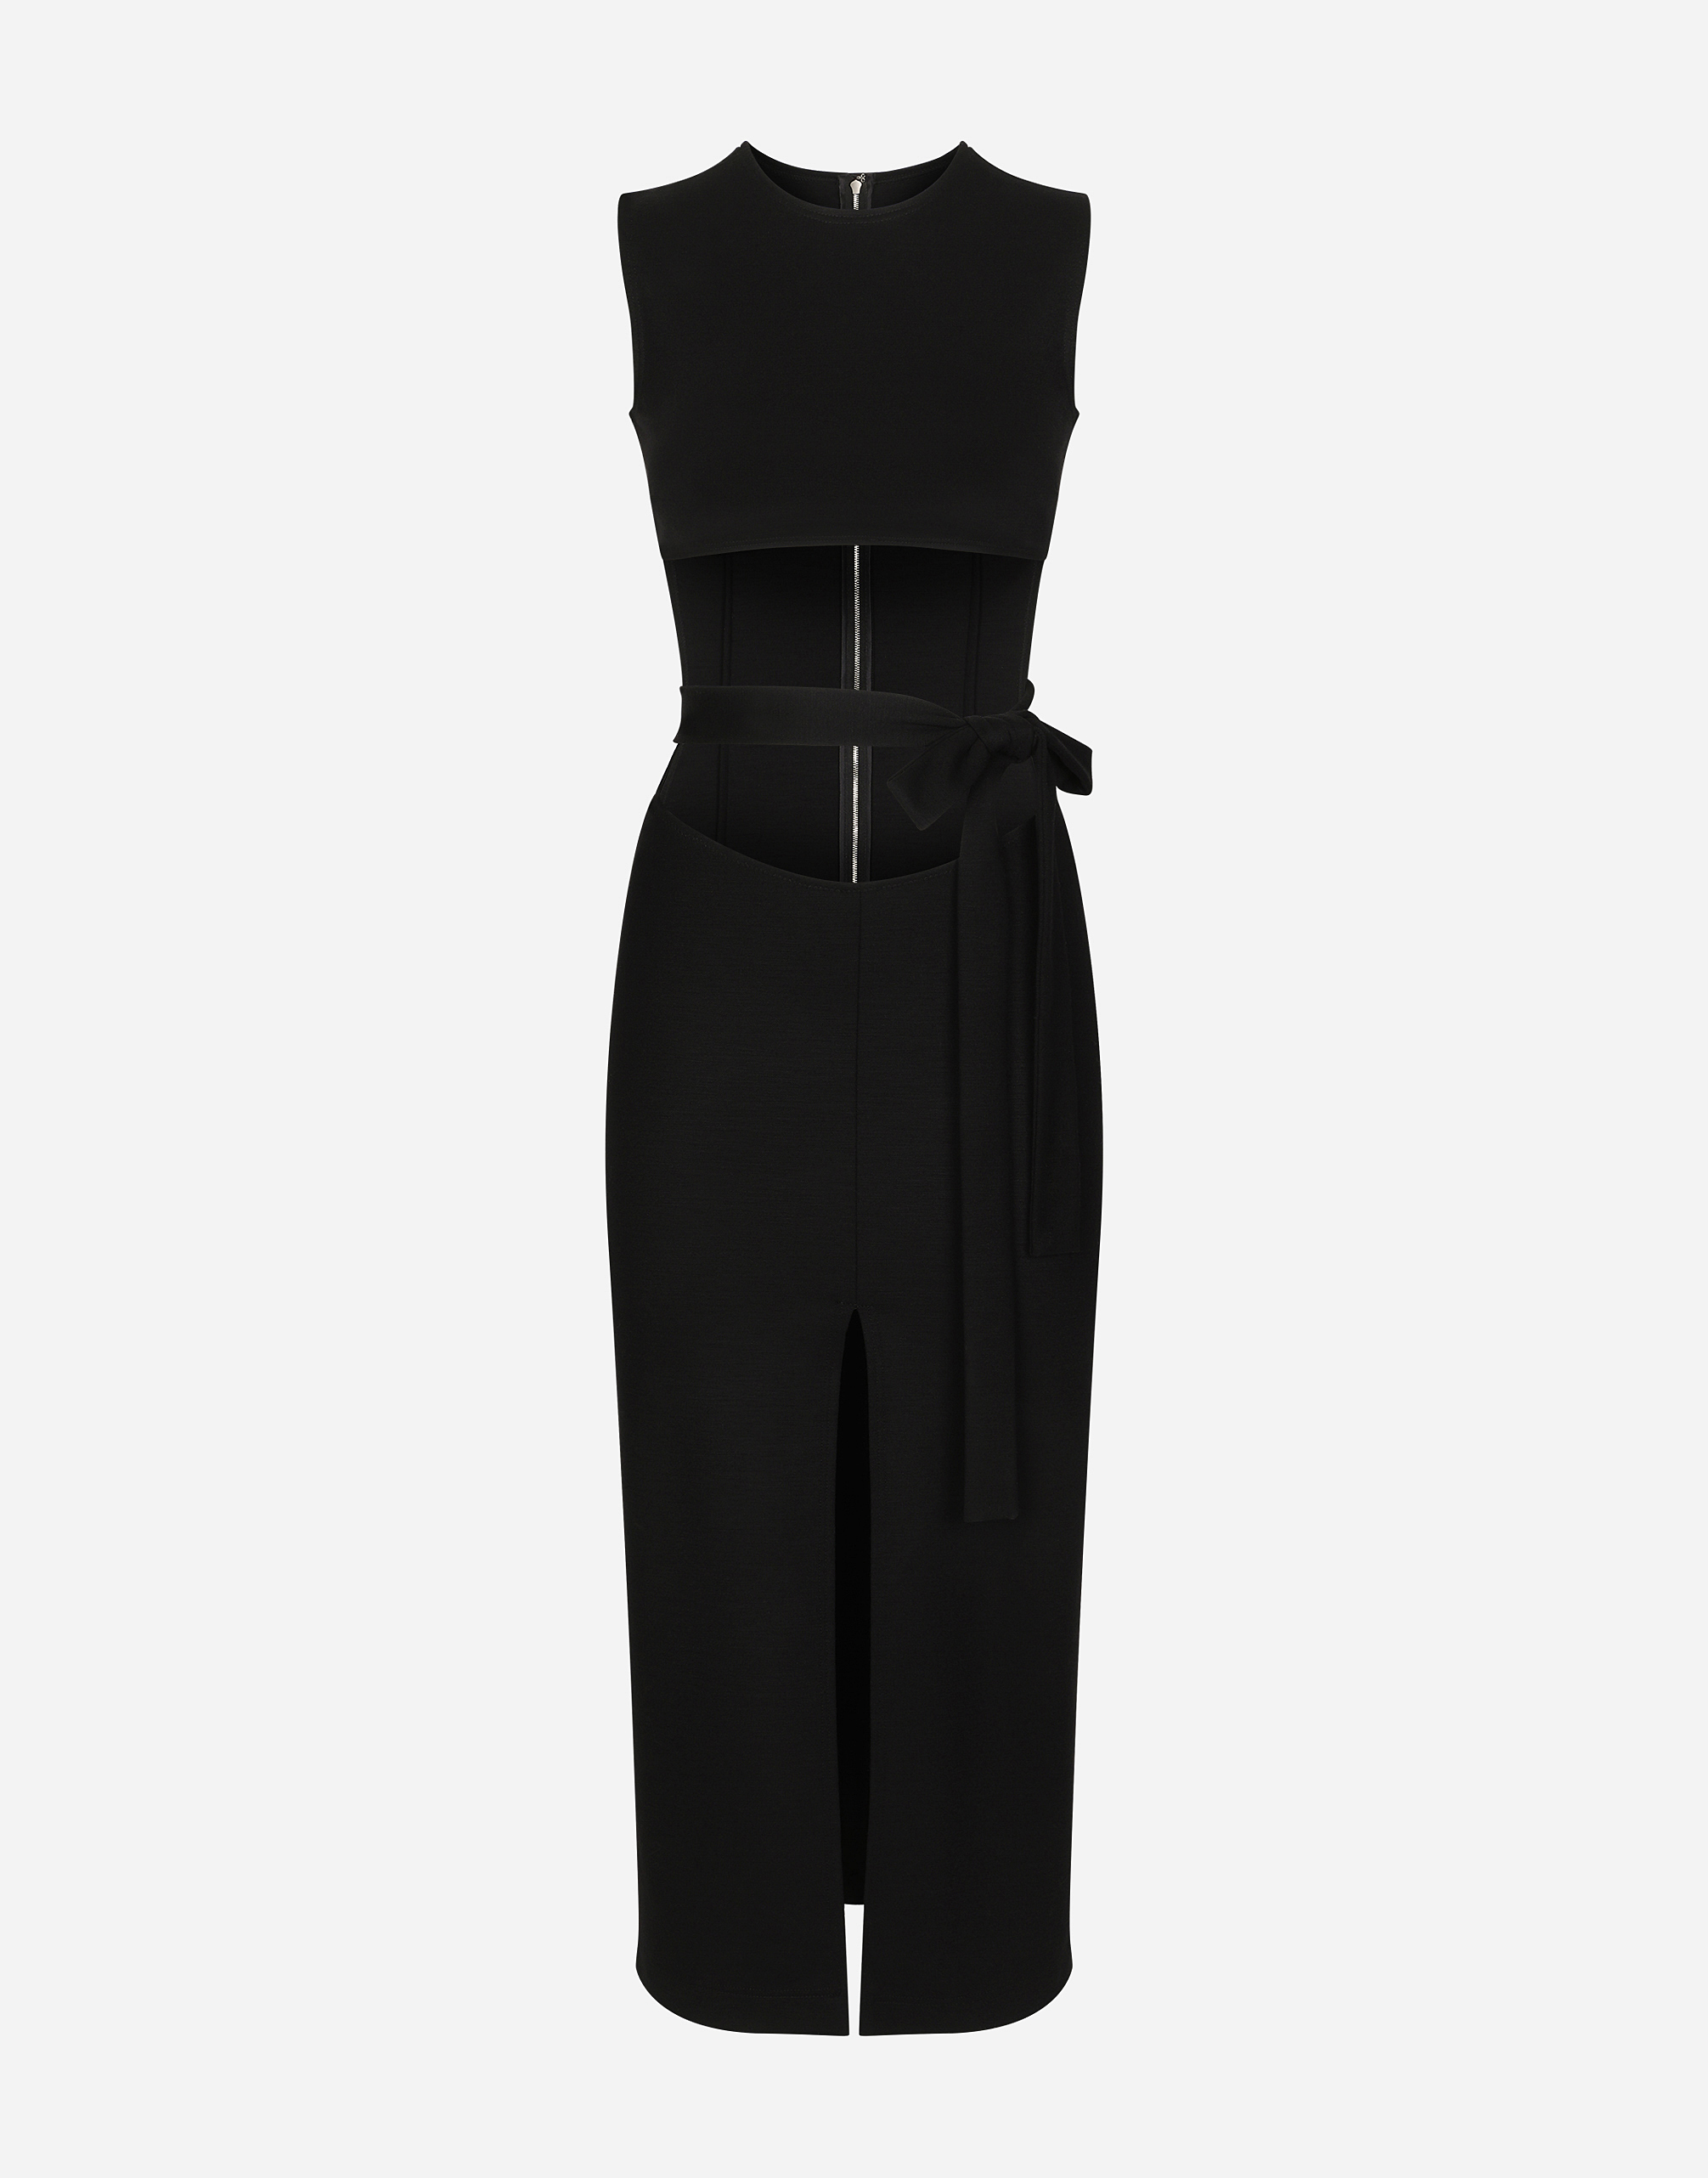 Belted jersey calf-length dress in Black